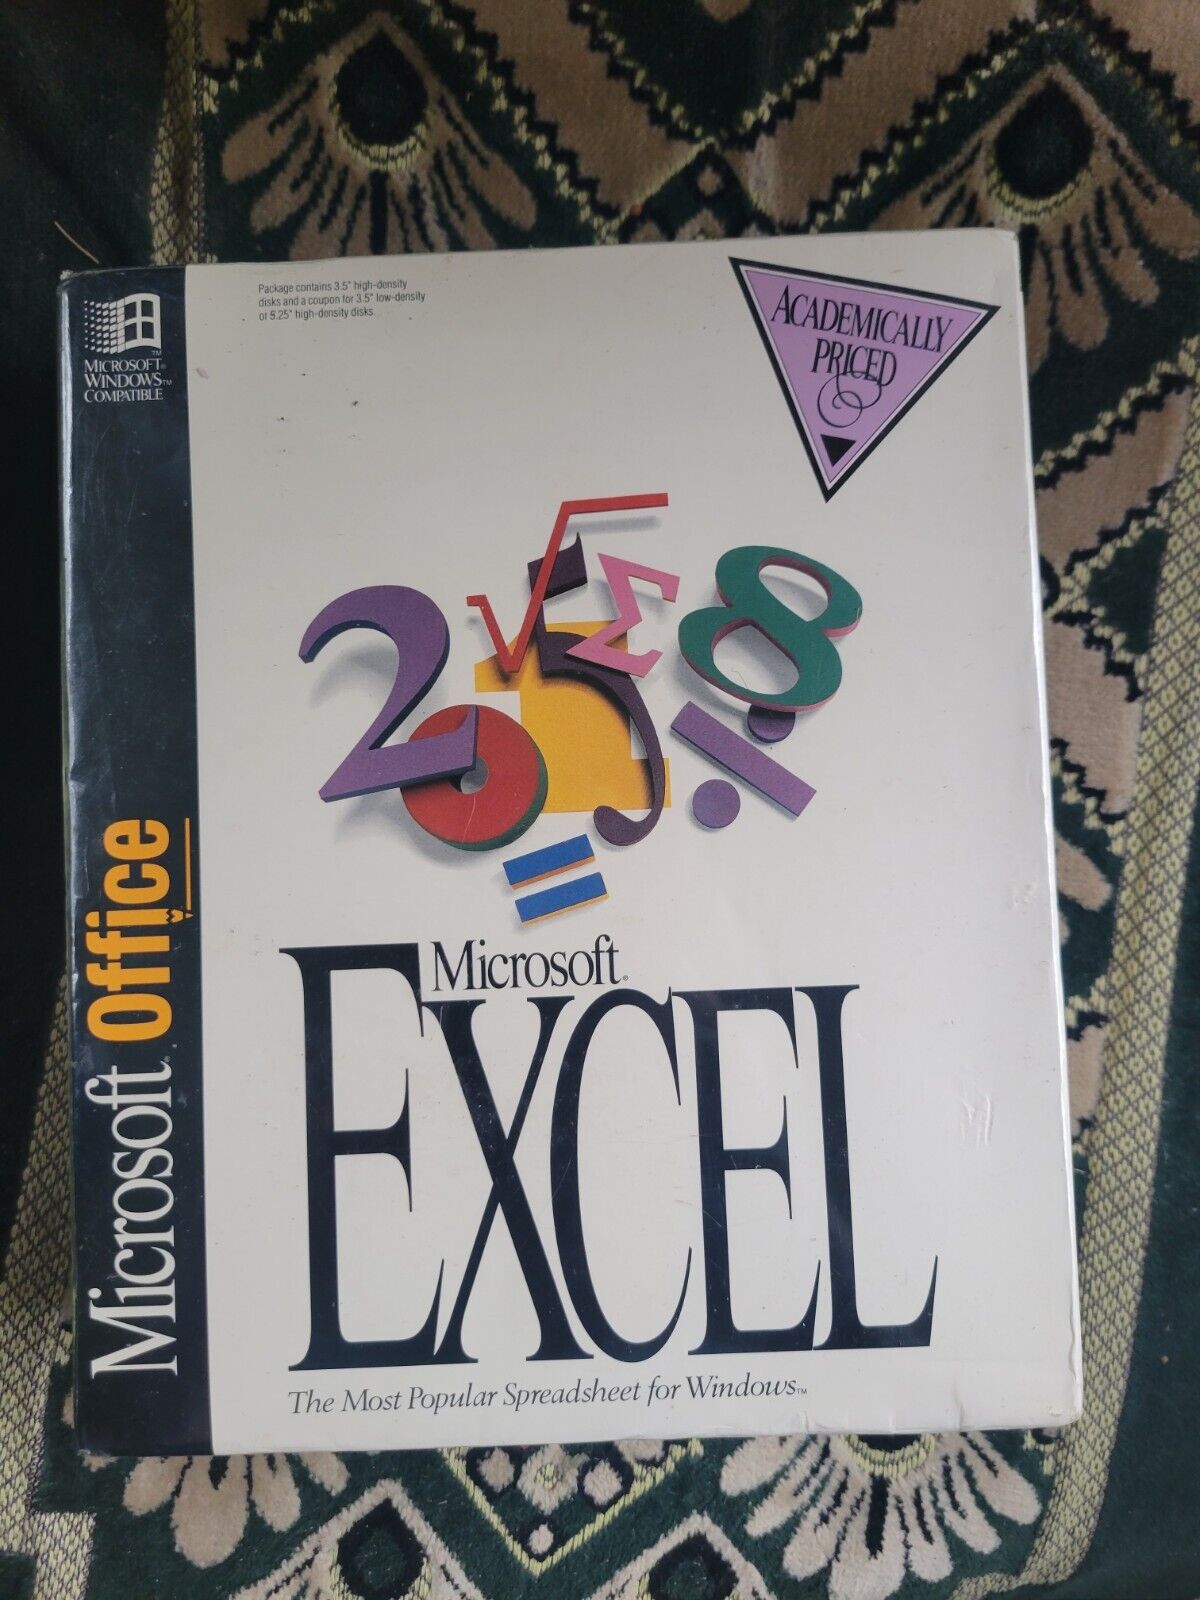 Microsoft Excel Version 5.0 For Windows PC on 3.5 HD Disks